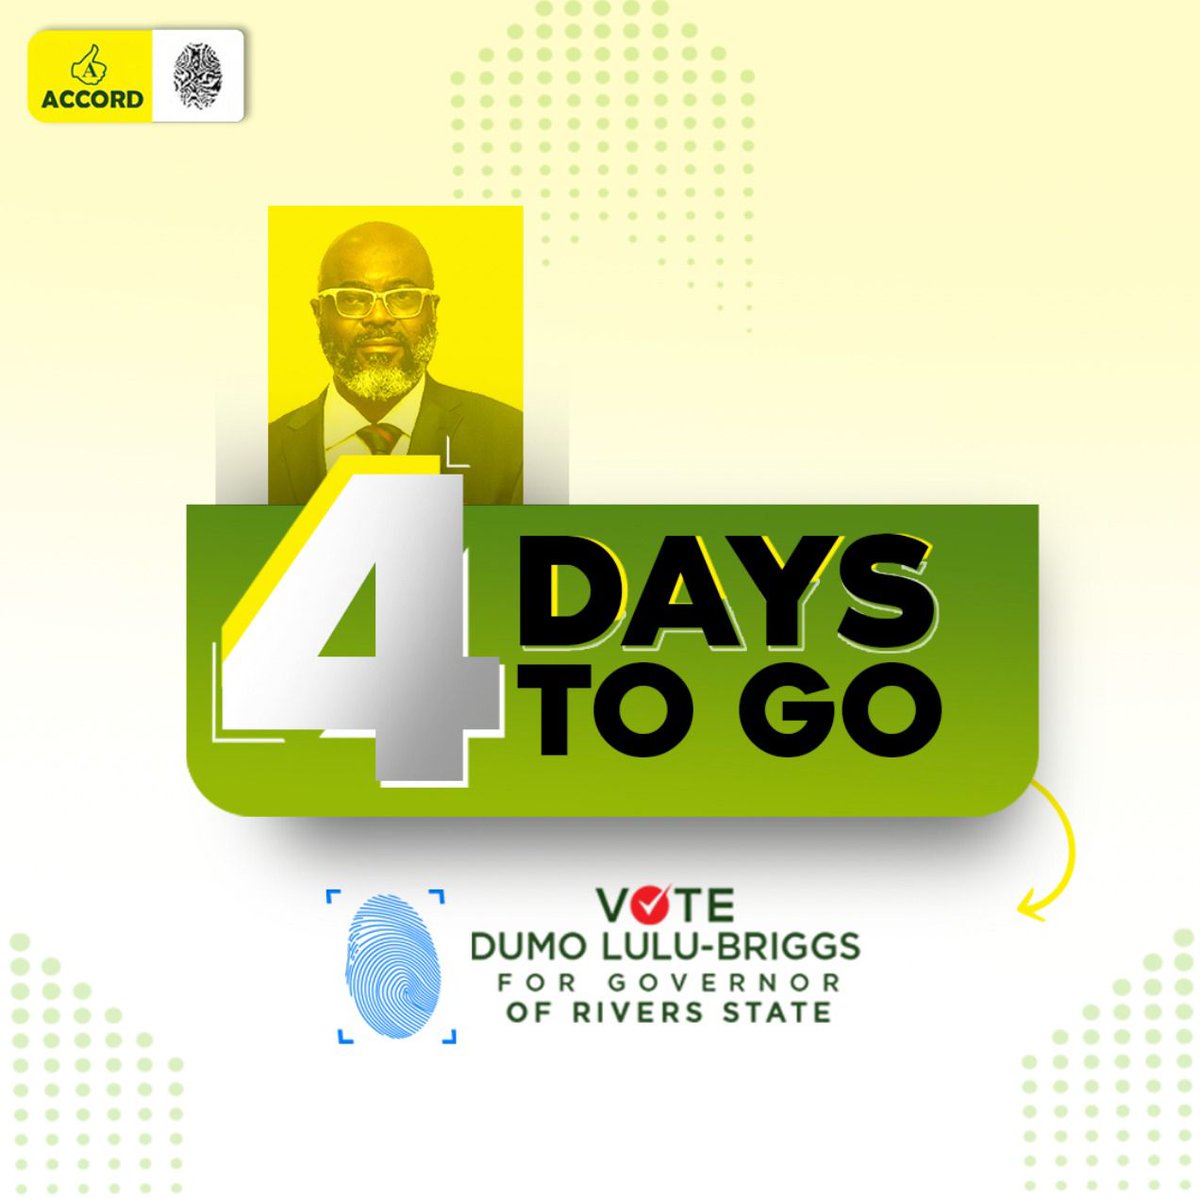 Wonderful Rivers state people, it's just 4 days to the election. Let's all come out ACCORDingly to vote for the right man for the job

Let's vote for the man that's ready to take Rivers state 10x further

Let's vote Dumo

#DumoWillDoMore
#DLB2023
#RiversDecide
#VoteAccord